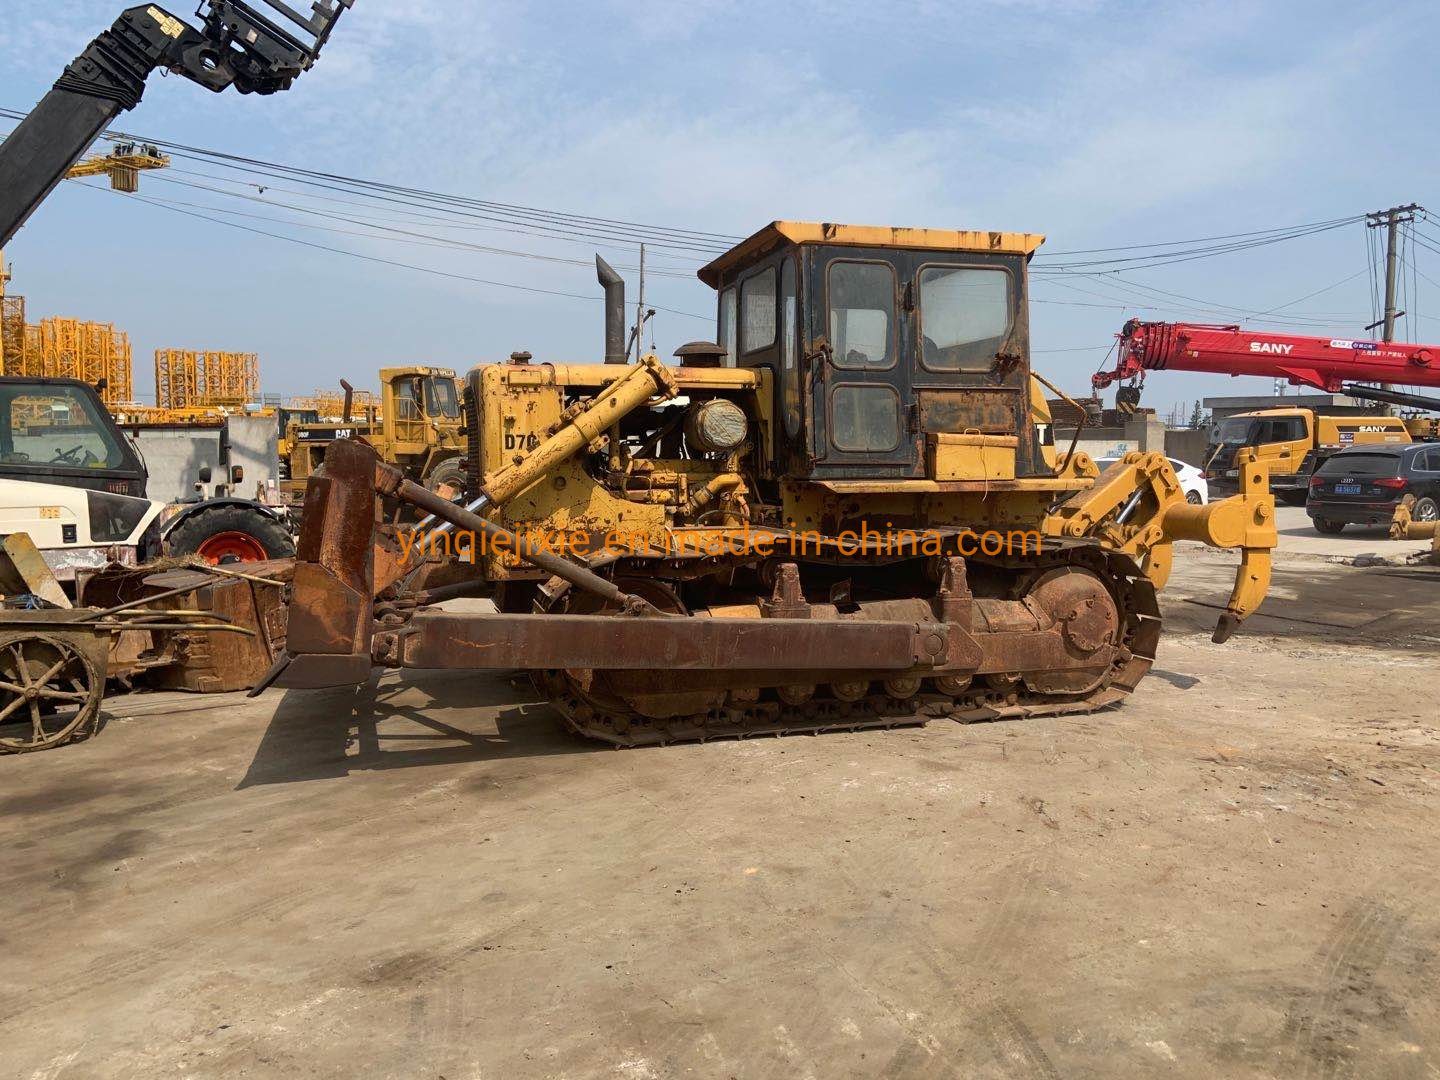 Used Cat D7g Bulldozer with Winch, Used Bulldozer Caterpillar D7g with Winch